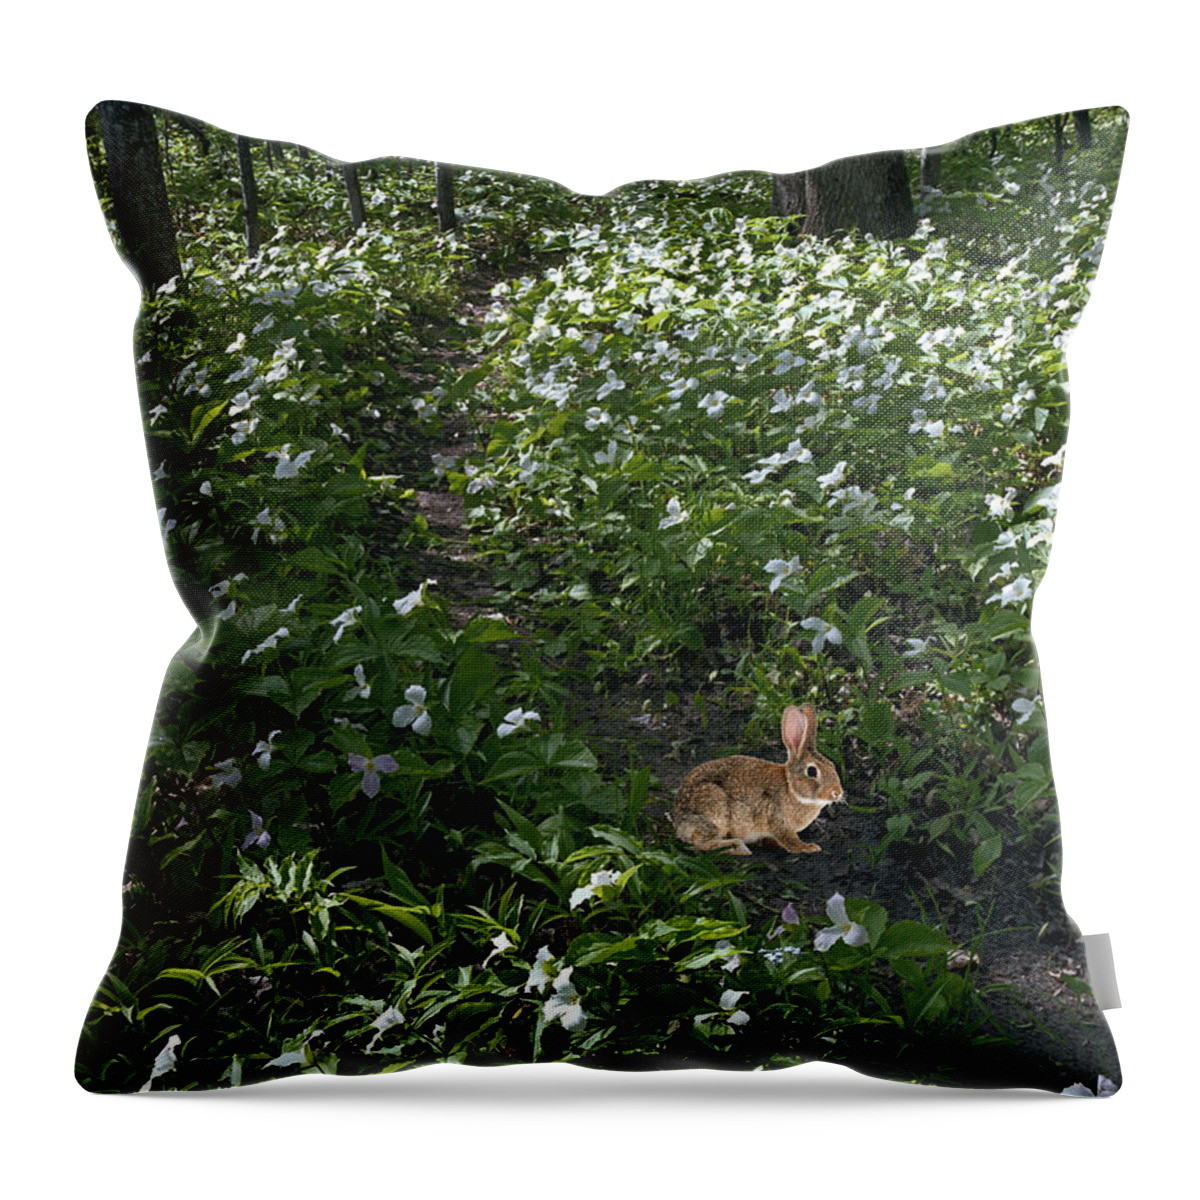 Trillium Woods Throw Pillow featuring the photograph Trillium Woods No. 3 by Kris Rasmusson